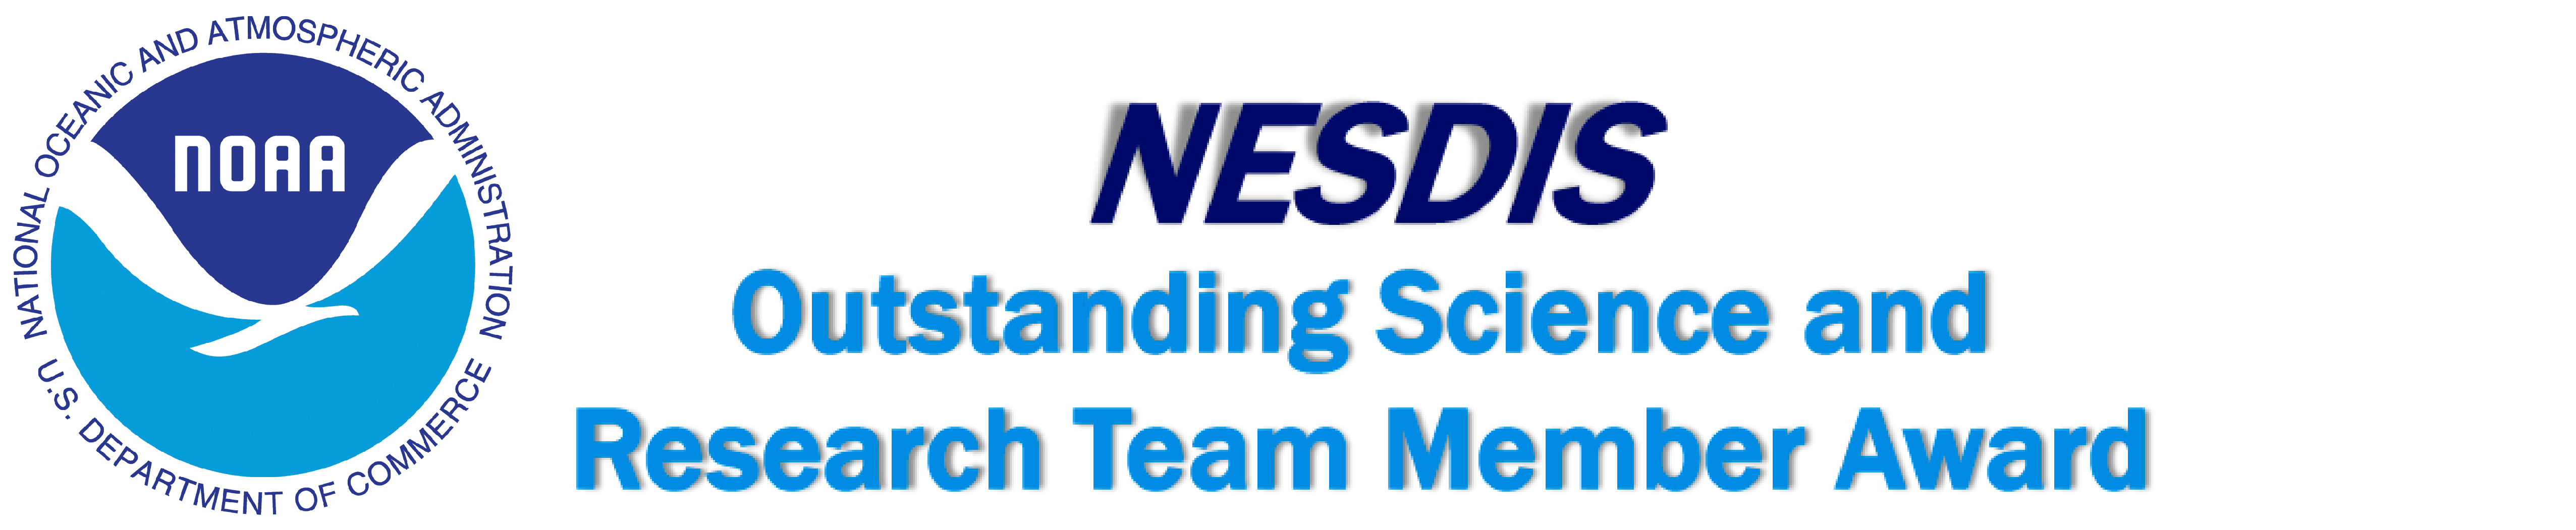 Image with the NOAA logo and text that reads Outstanding Science and Research Team Member Award.